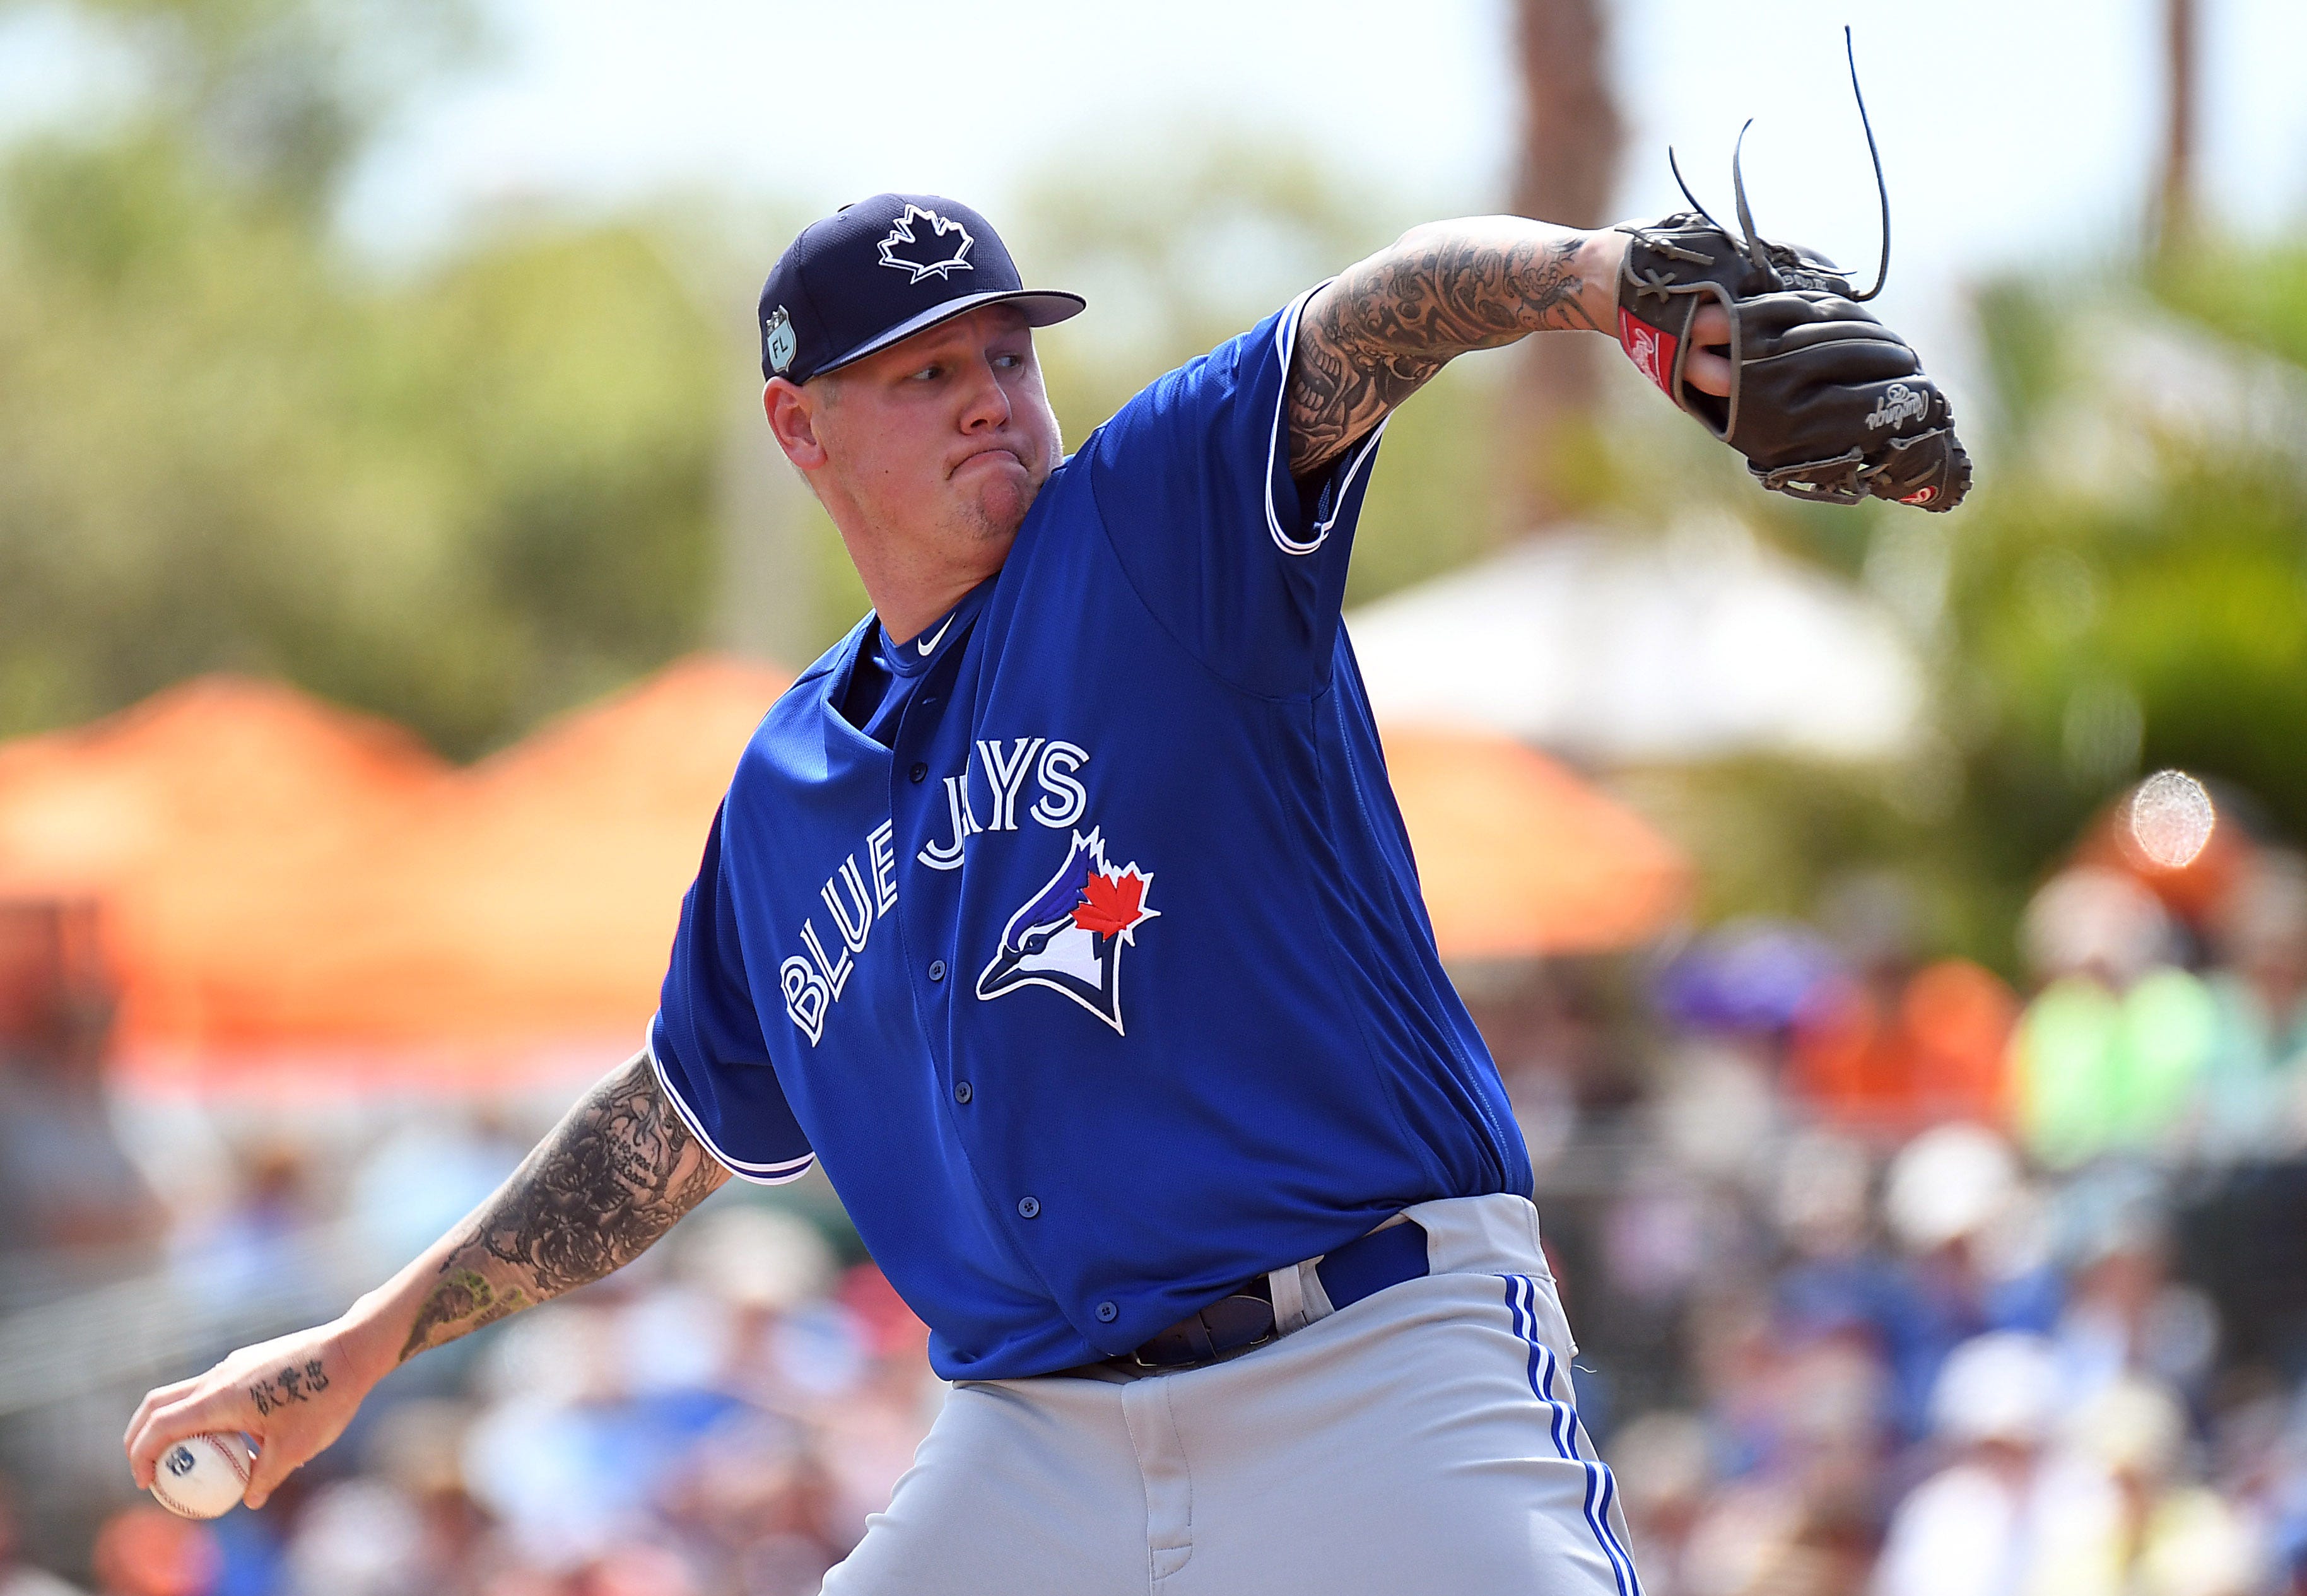 Former MLB pitcher Mat Latos incites benches-clearing brawl in independent league game